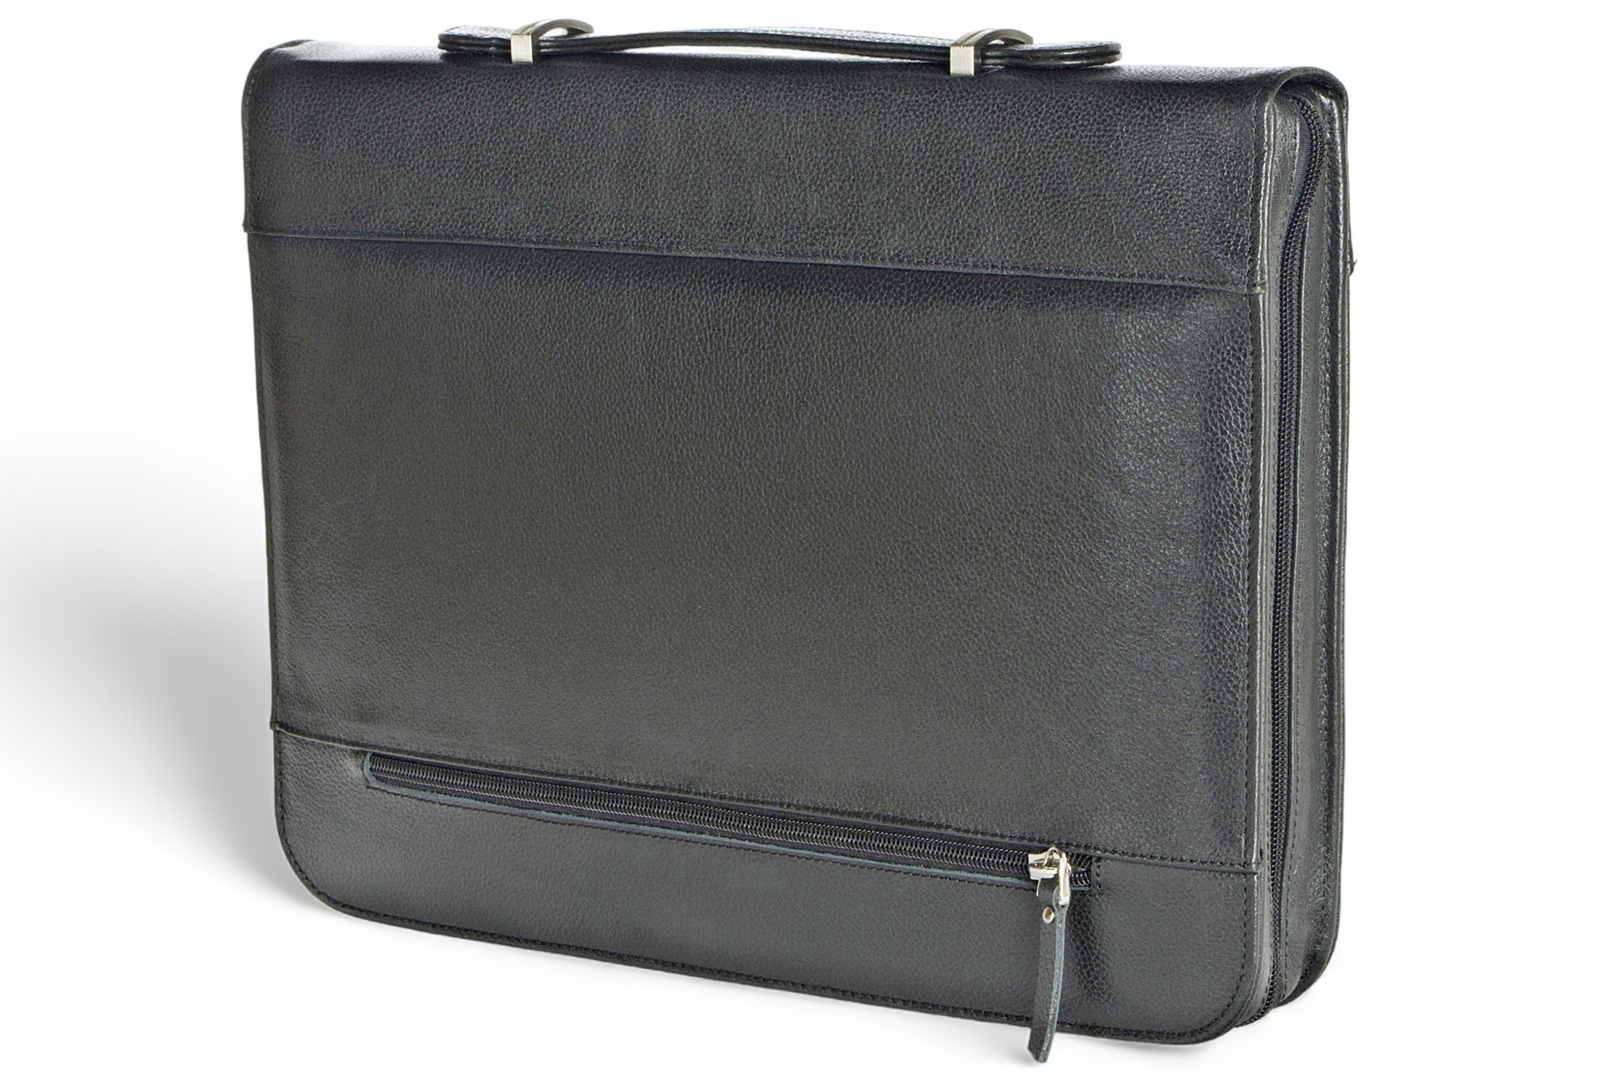 A4 zippered conference folder made of genuine leather. 19R EL 4-1F